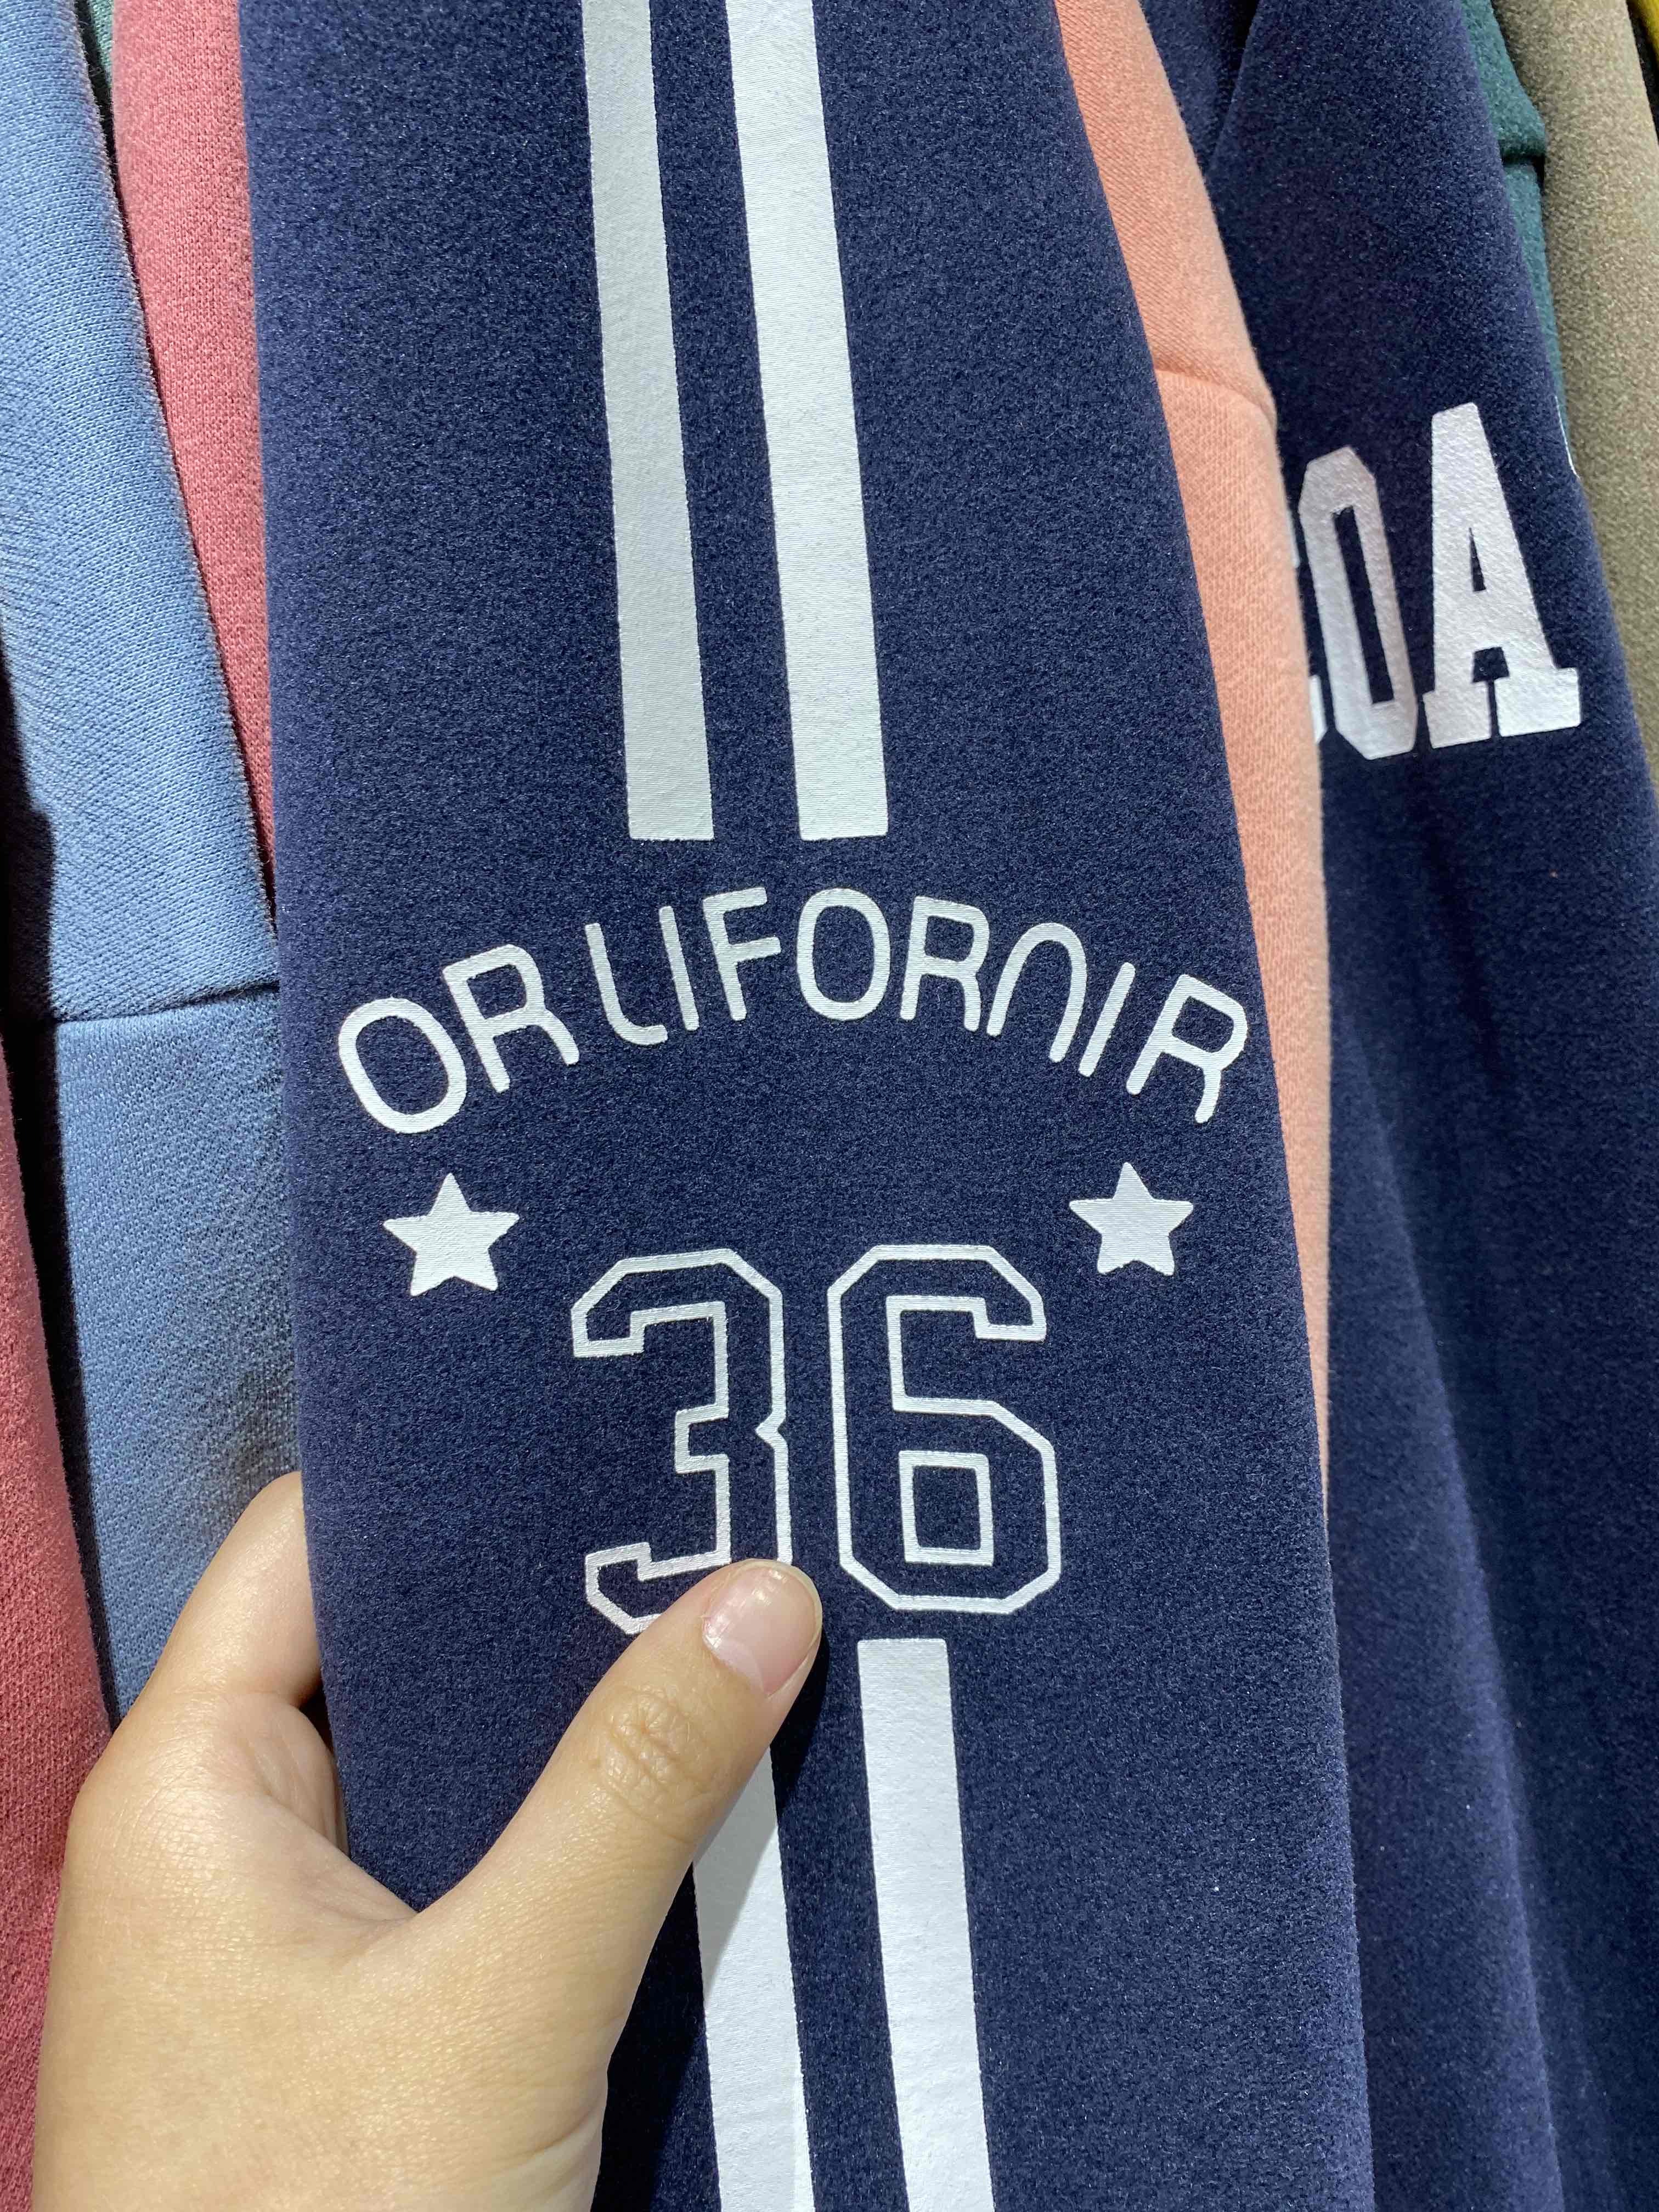 a shirt with "orlifornir" printed on it. its clearly meant to say "california"